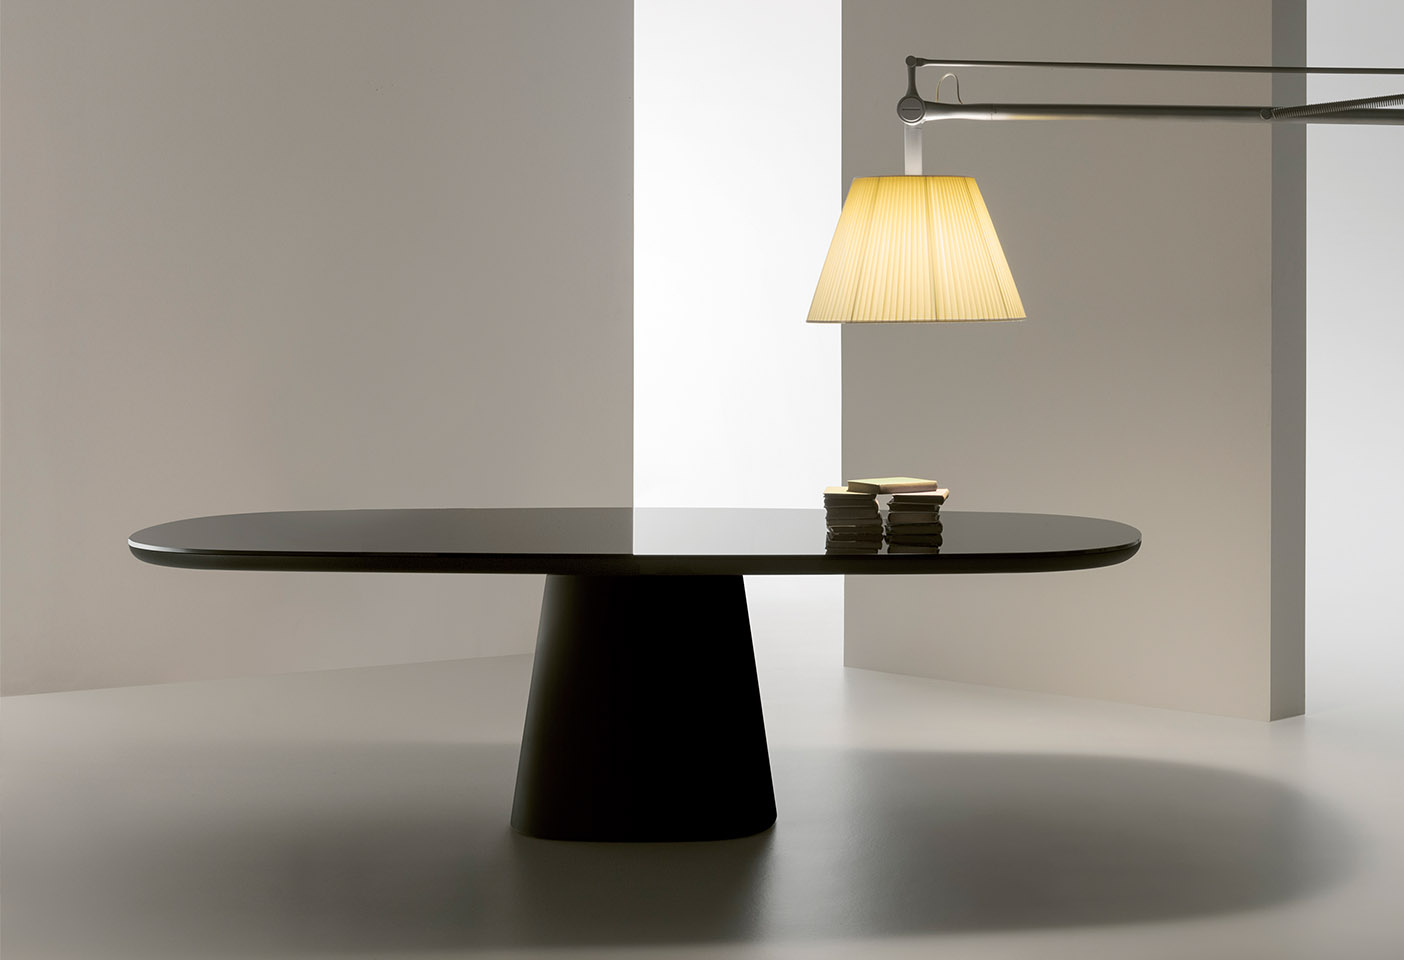 Monica Armani's Allure O’ table, here and following, described by B&B Italia as a 